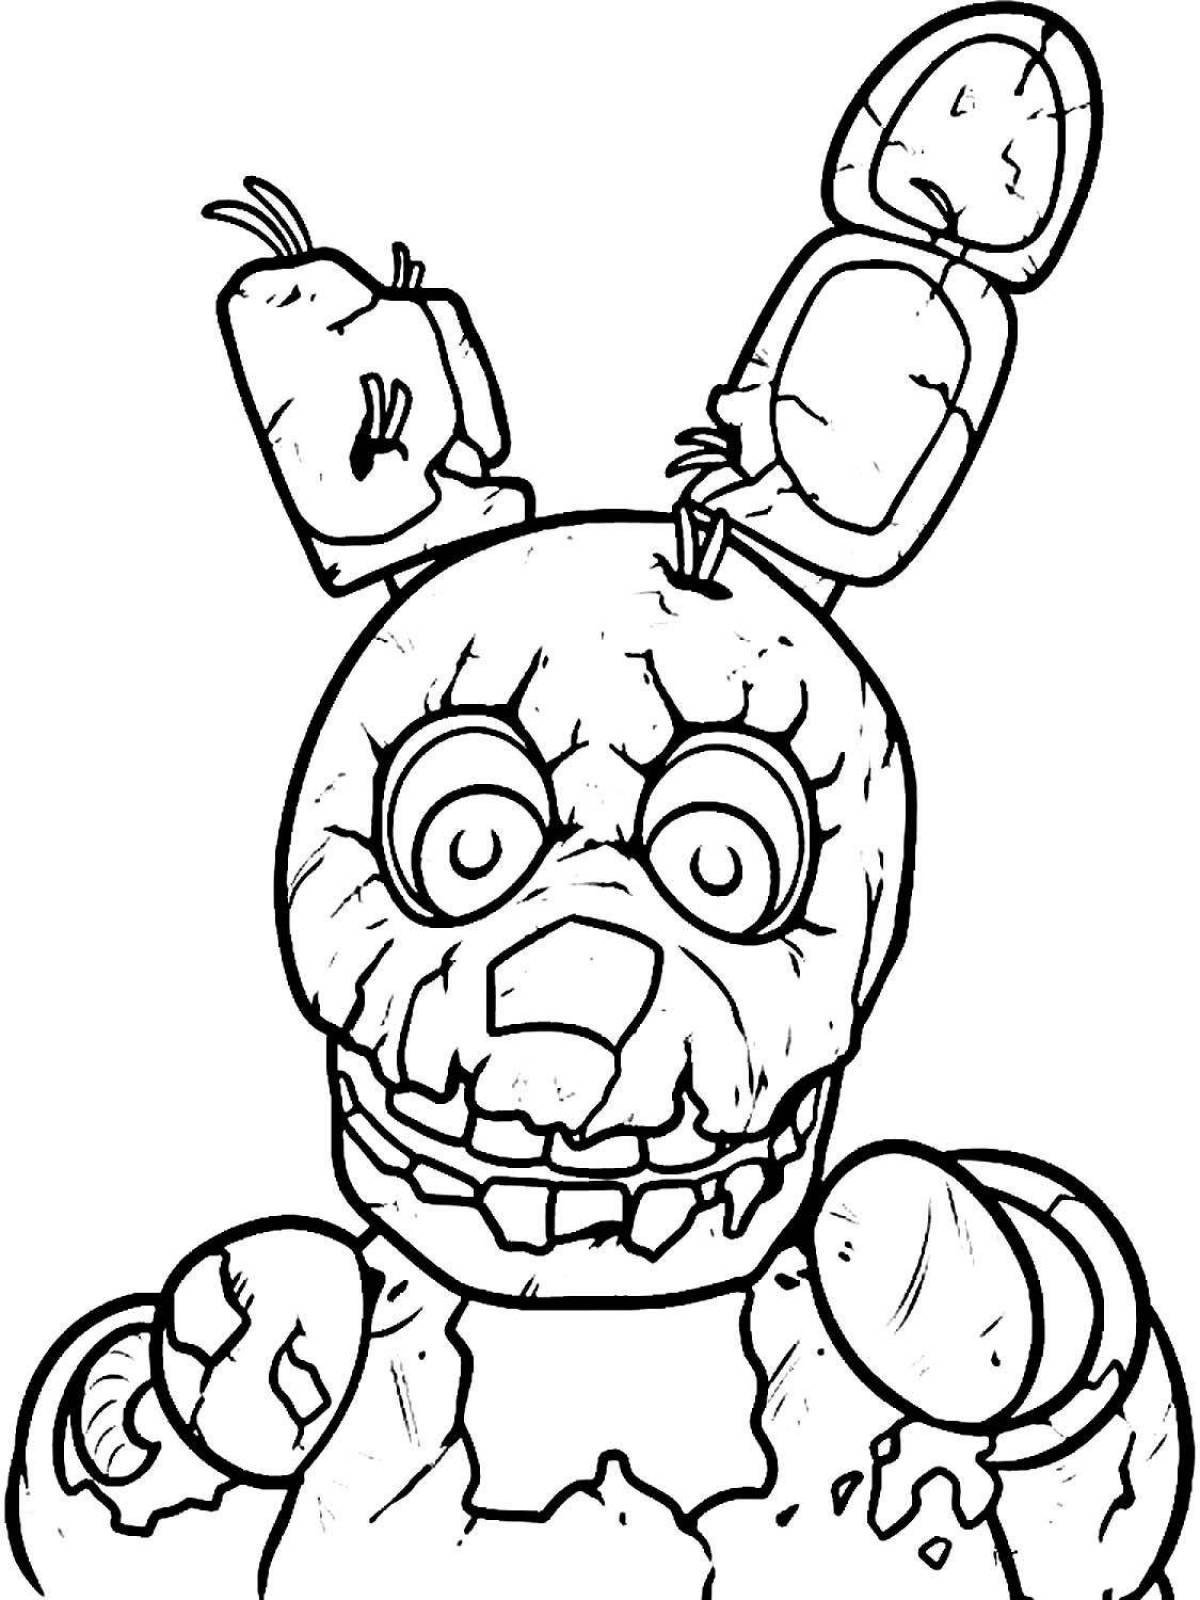 Magic bear freddy coloring pages for kids